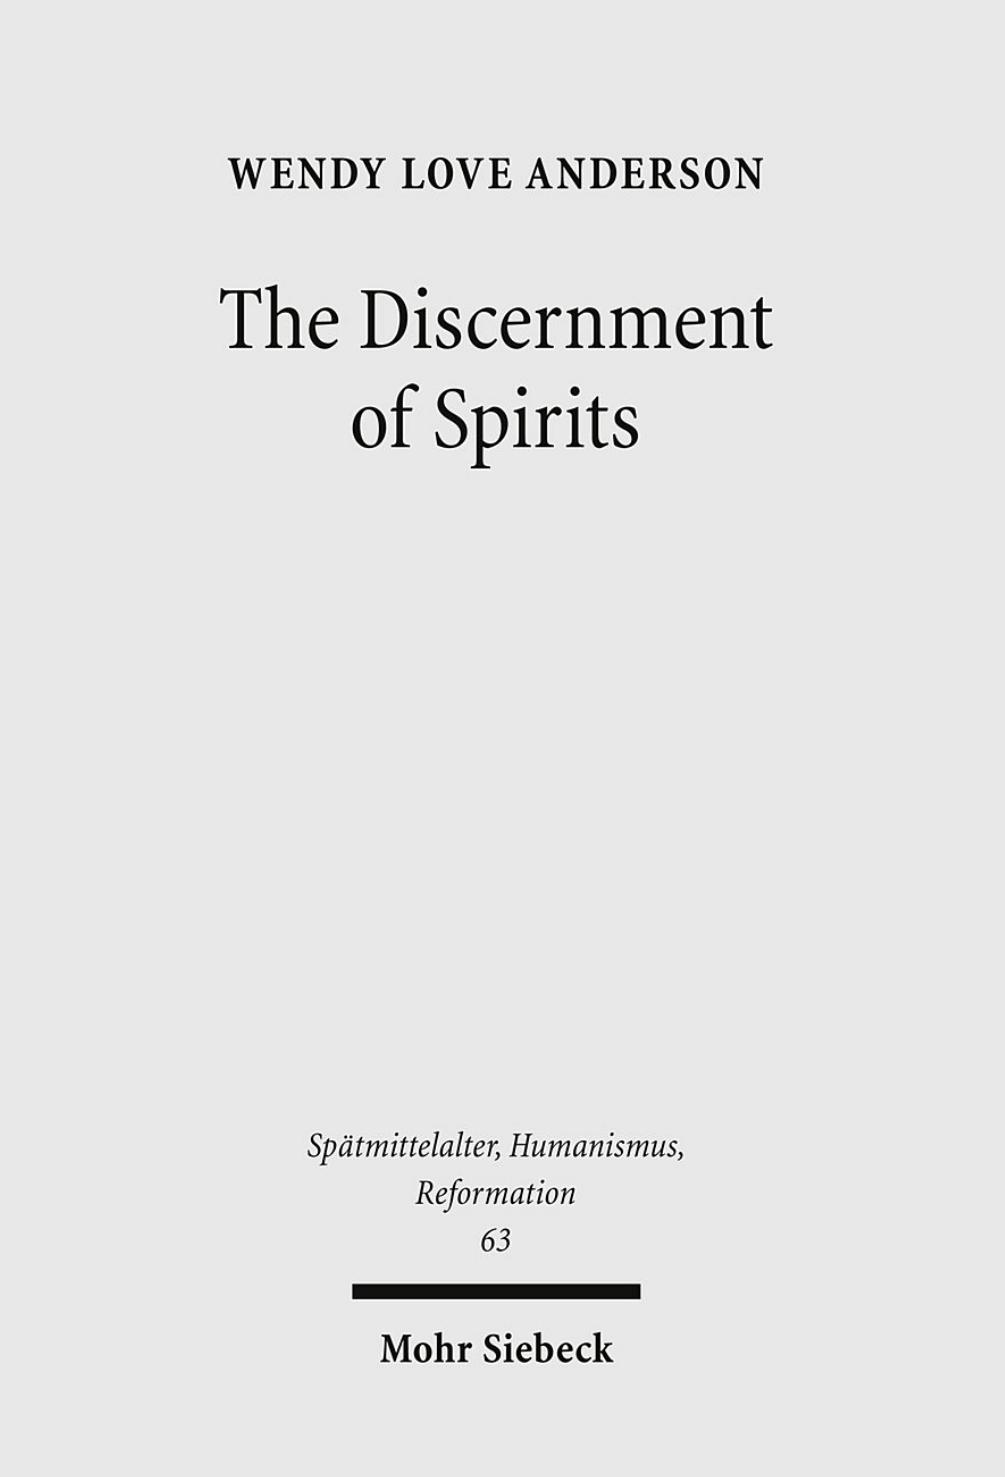 The Discernment of Spirits by Wendy Love Anderson